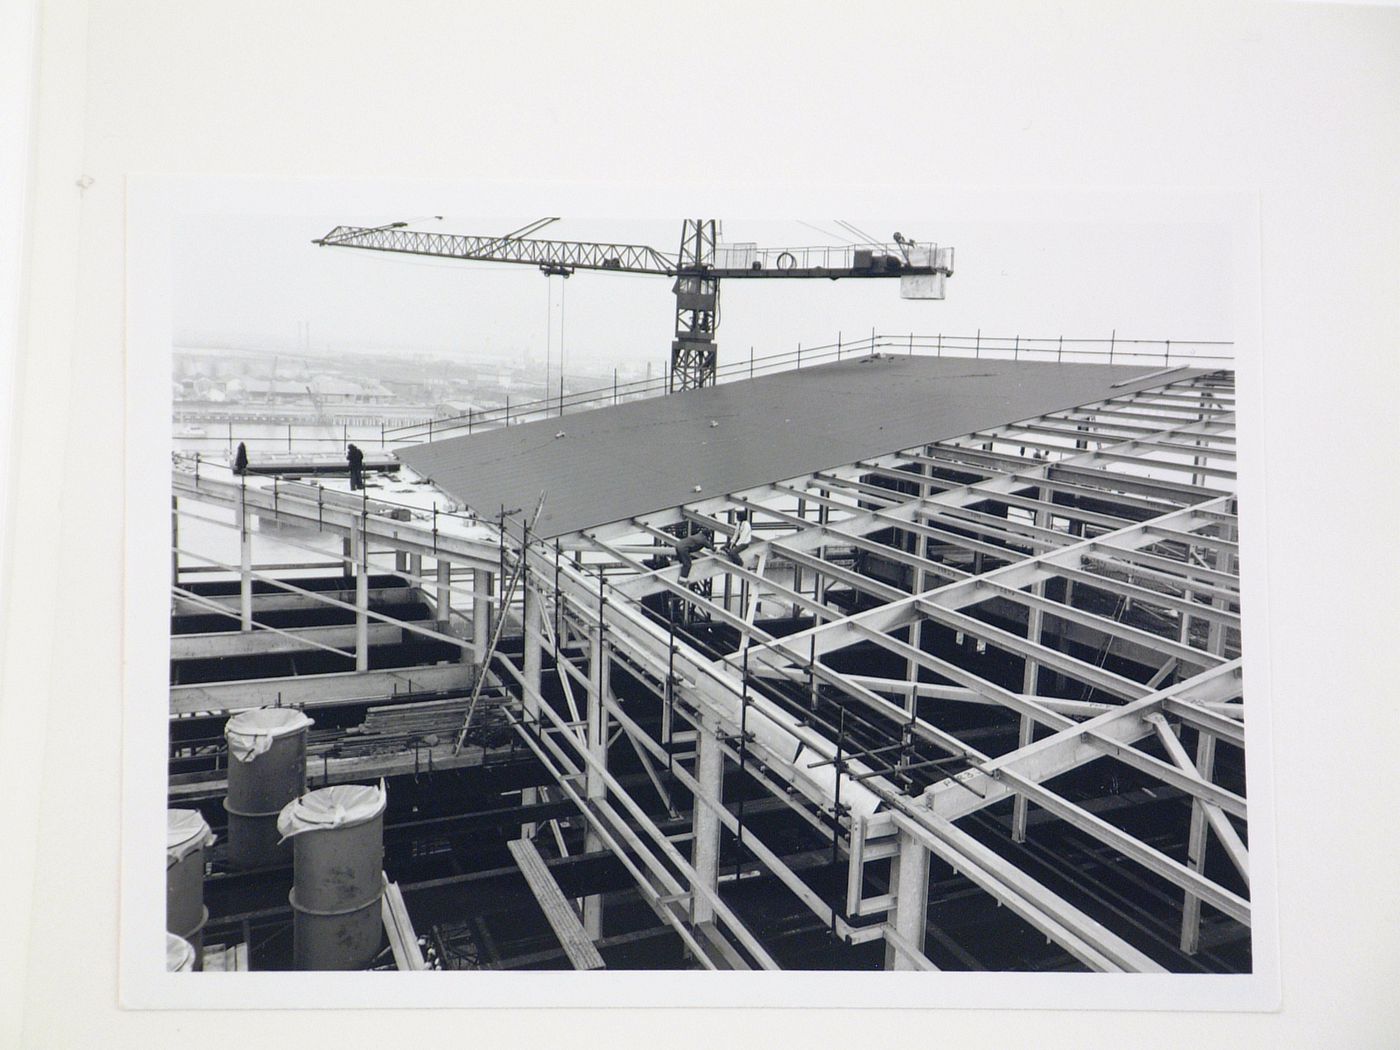 View of installation of roof panels for power station, United Kingdom